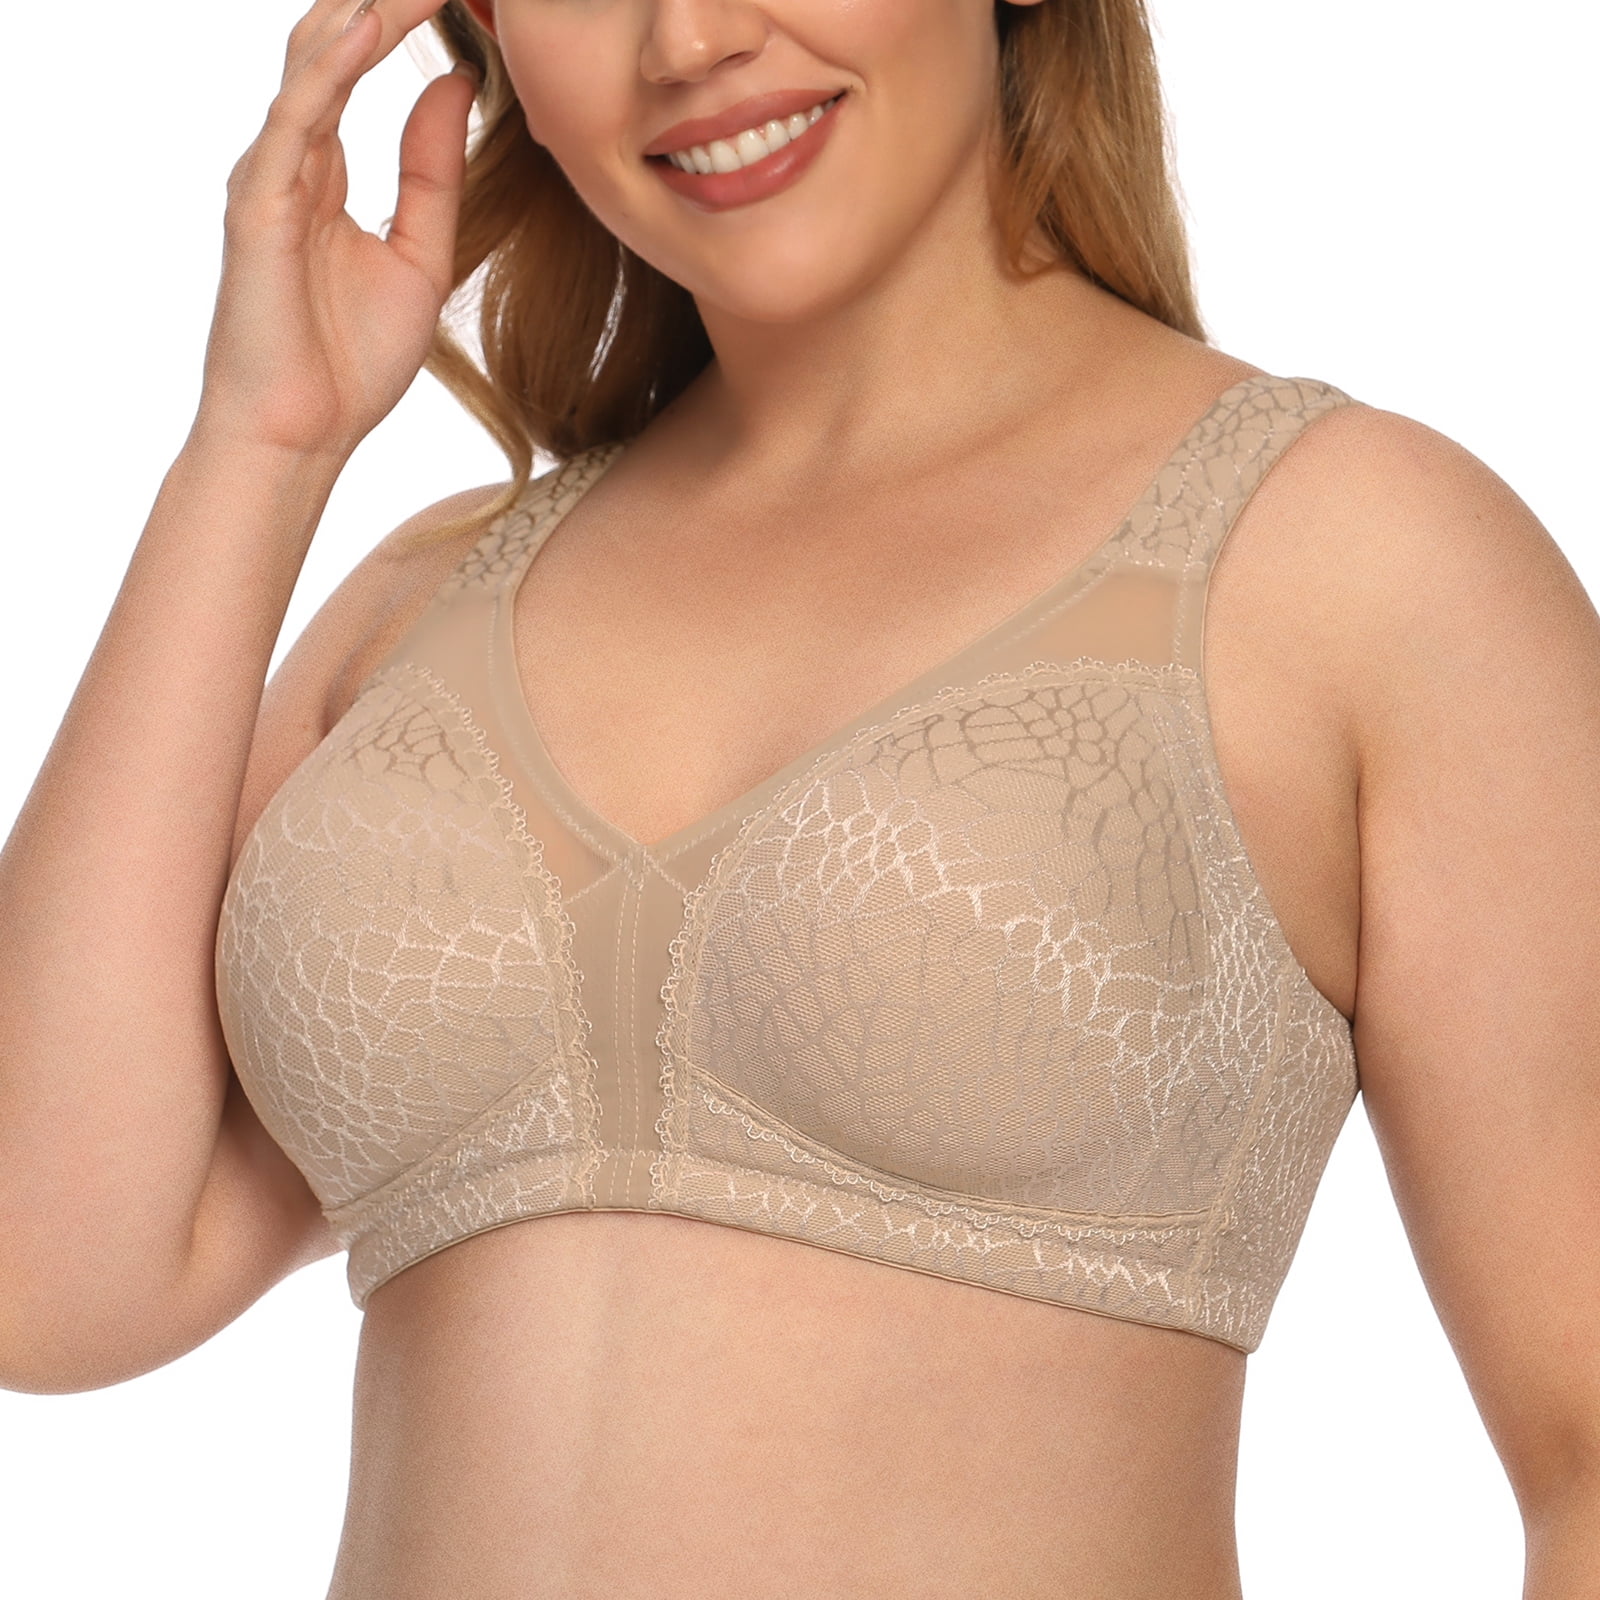 Women Minimizer Bra For Full Coverage & High Side Support Bra in D-Cup Size